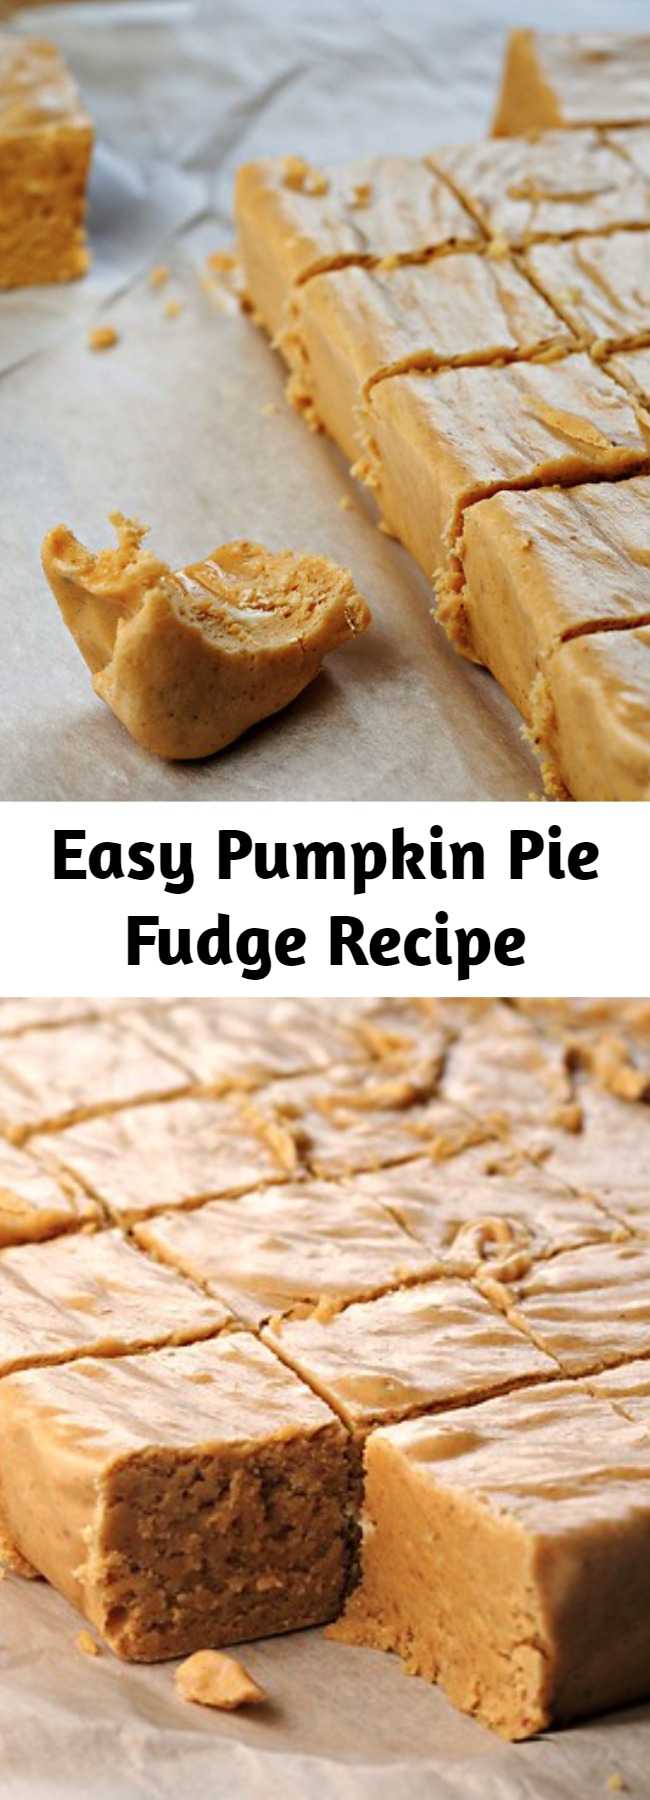 Easy Pumpkin Pie Fudge Recipe - Soft, creamy fudge with all the flavors of your favorite pumpkin pie. It’s the perfect Thanksgiving splurge is you’re looking for a little bit of the real deal. Enjoy!